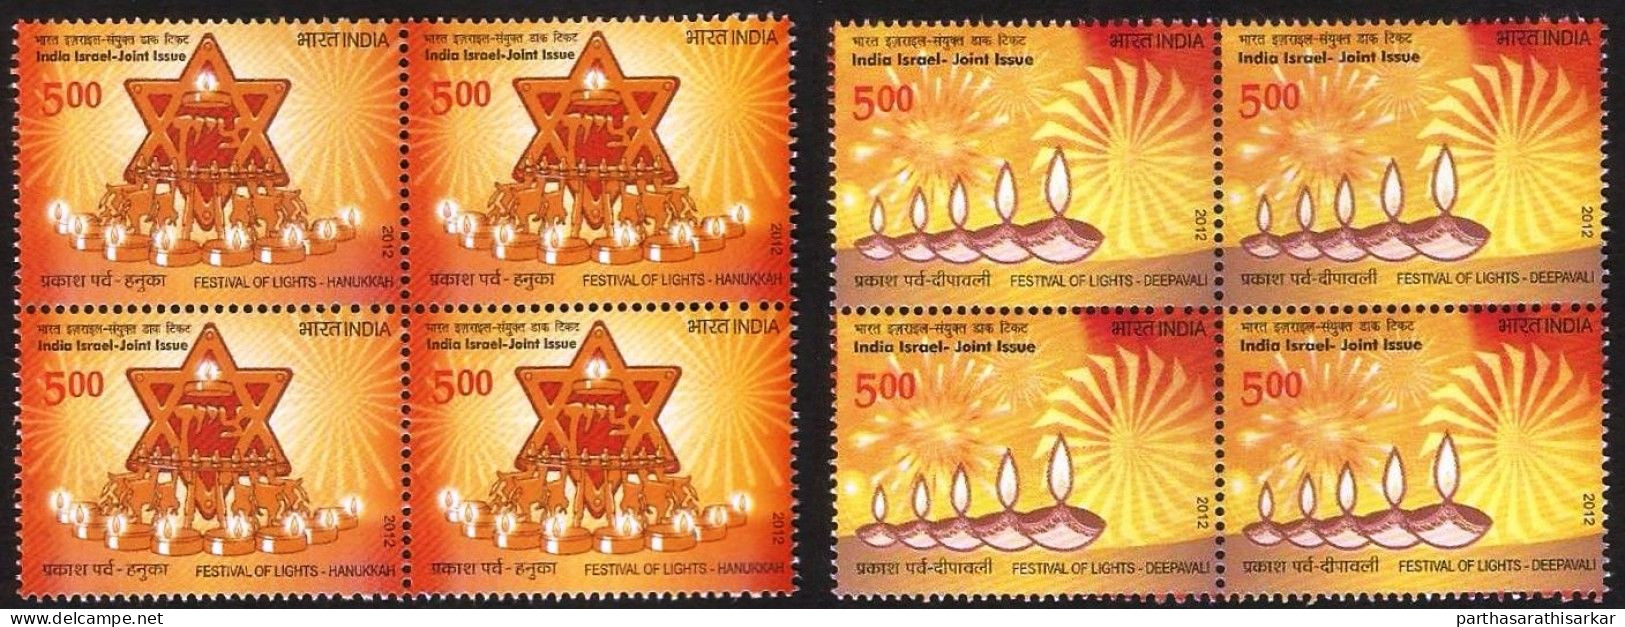 INDIA 2012 FESTIVAL OF LIGHTS JOINT ISSUE WITH ISRAEL COMPLETE SET BLOCK OF 4 MNH RARE - Ongebruikt